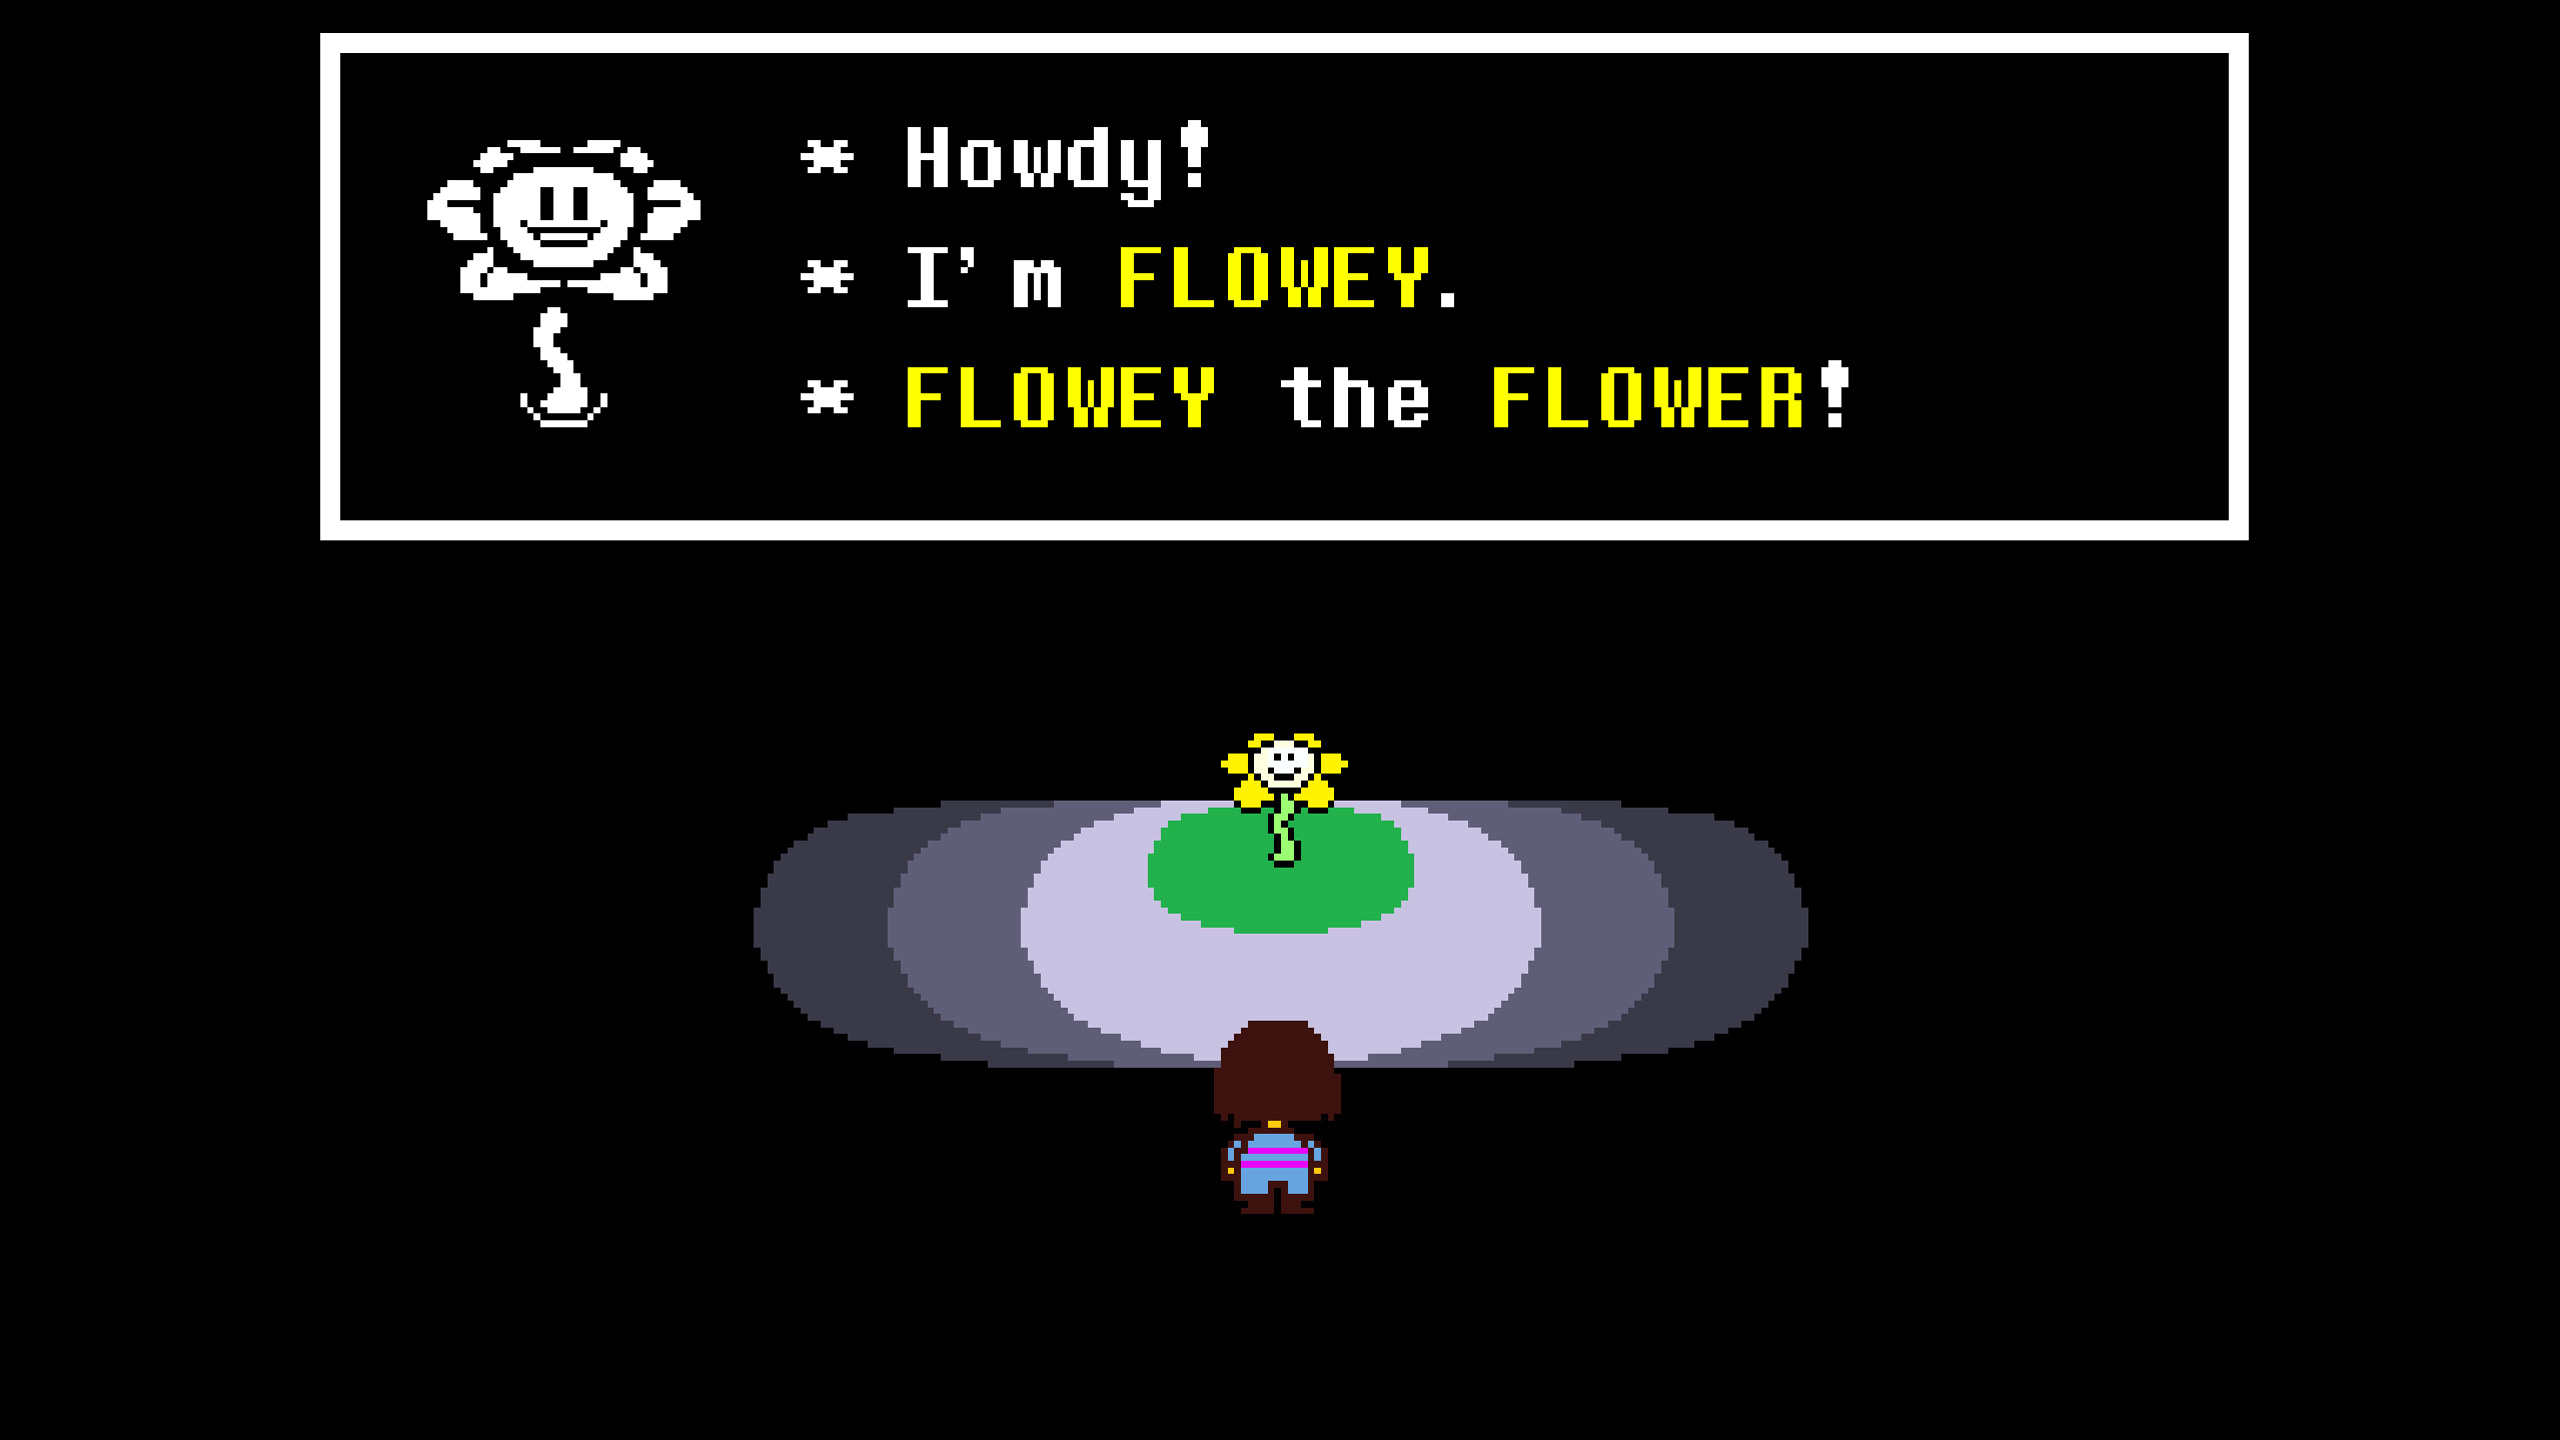 undertale review full cleared